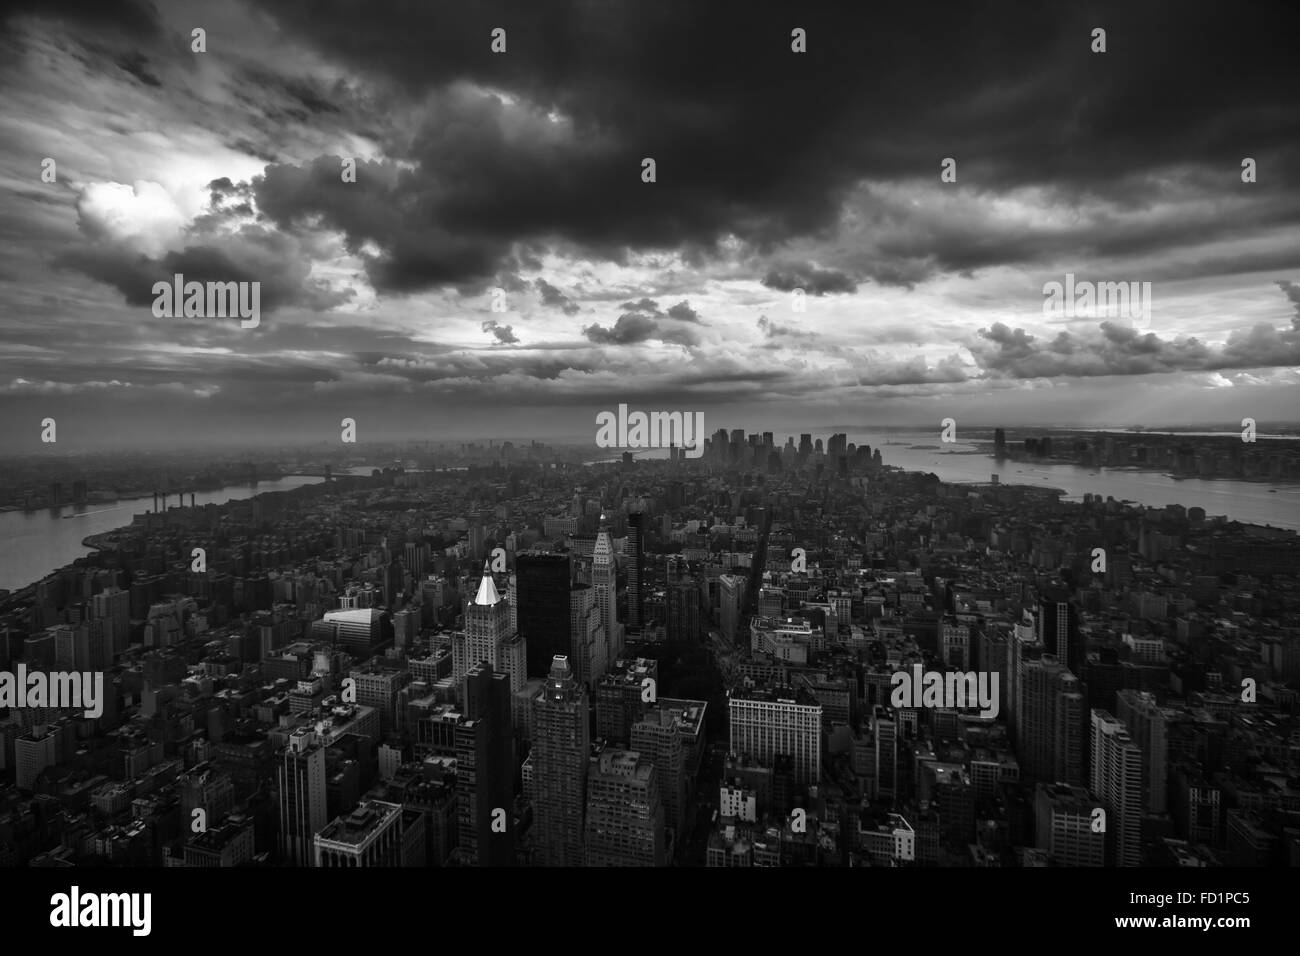 A black and white image of the view from top of the Empire State Building, New York City, New York, United States of America. Stock Photo